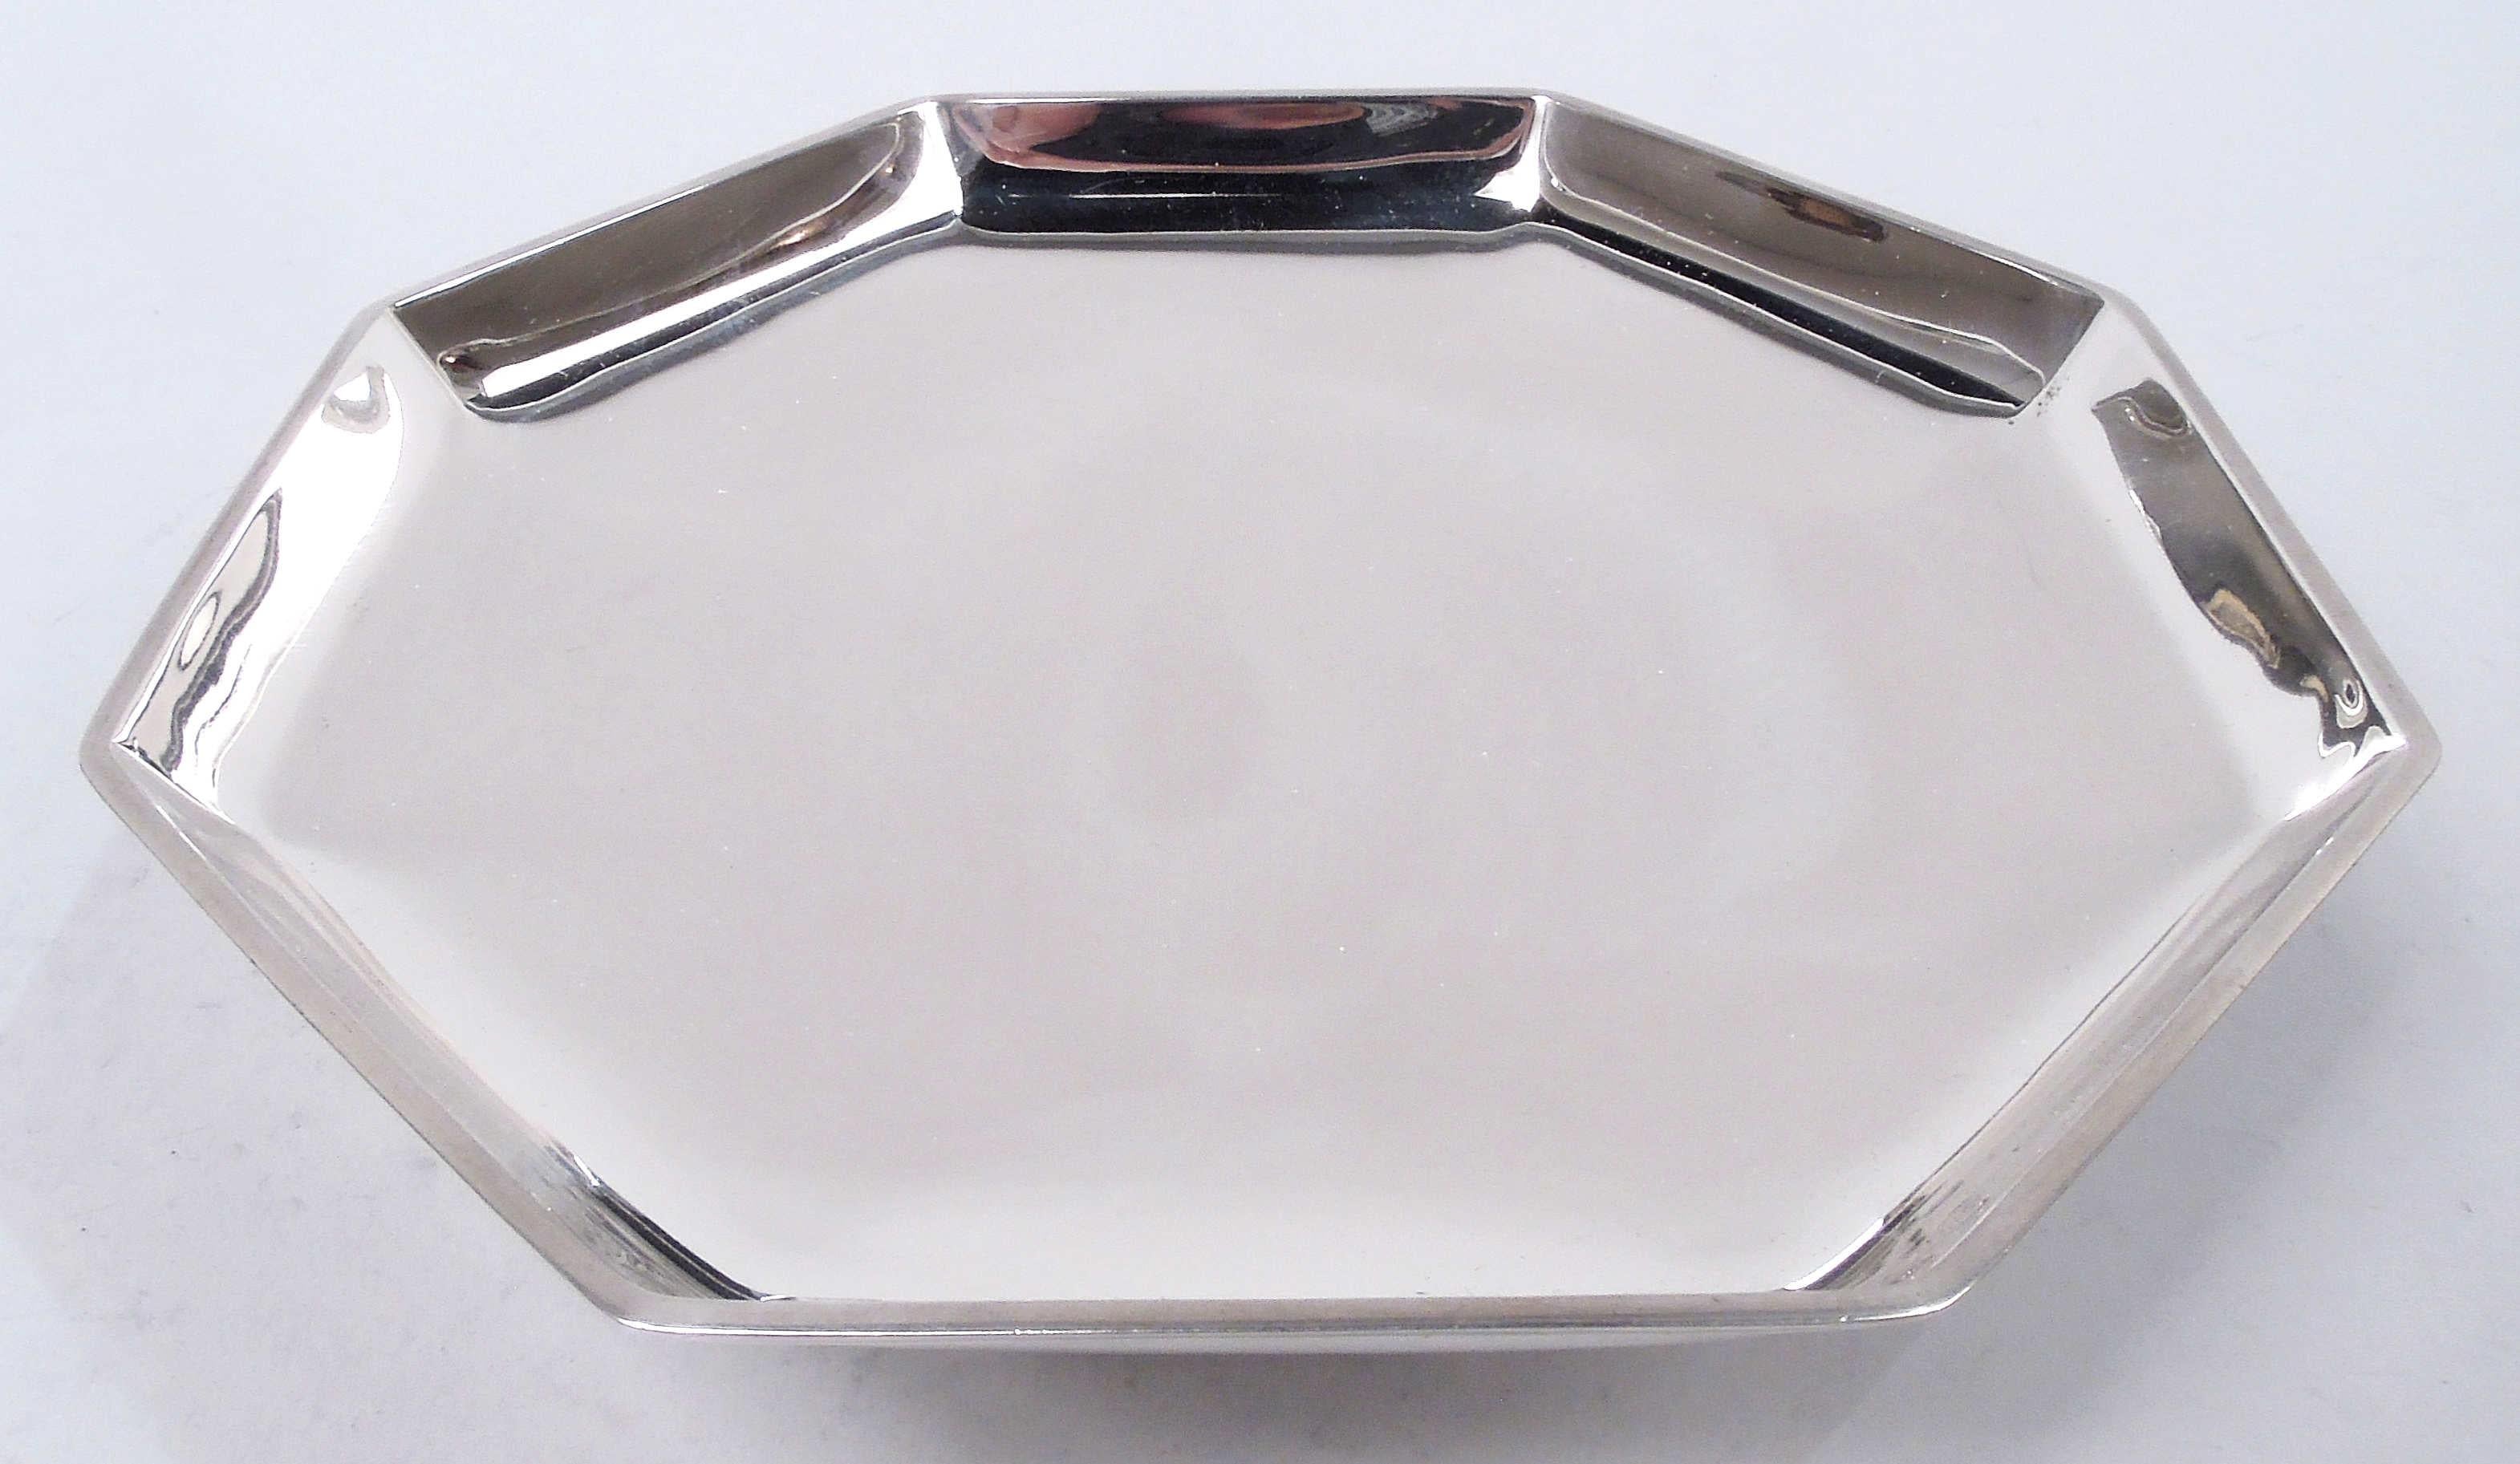 Art Deco sterling silver footed bowl. Made by Tiffany & Co. in New York, ca 1914. Shallow and octagonal with flat rim; raised and stepped support. Fully marked including maker’s stamp, pattern no. 18780 (first produced in 1914), and director’s